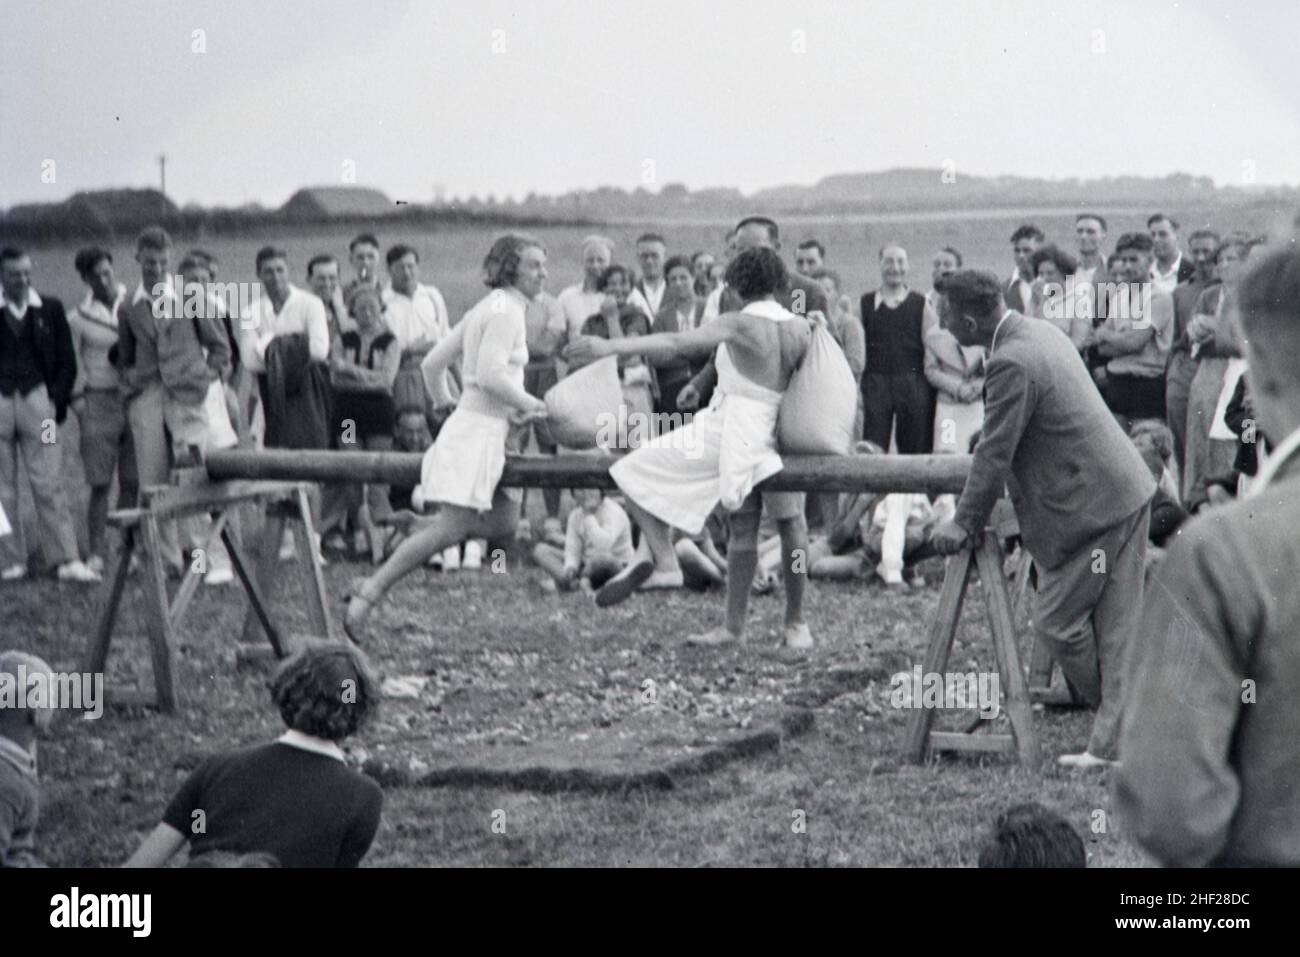 Vintage Image or Black and White Photograph of Spectators and Players in a Traditional Pillow Fight Game on Wooden Beam Played in an English Holiday Camp in the 1930s England Stock Photo